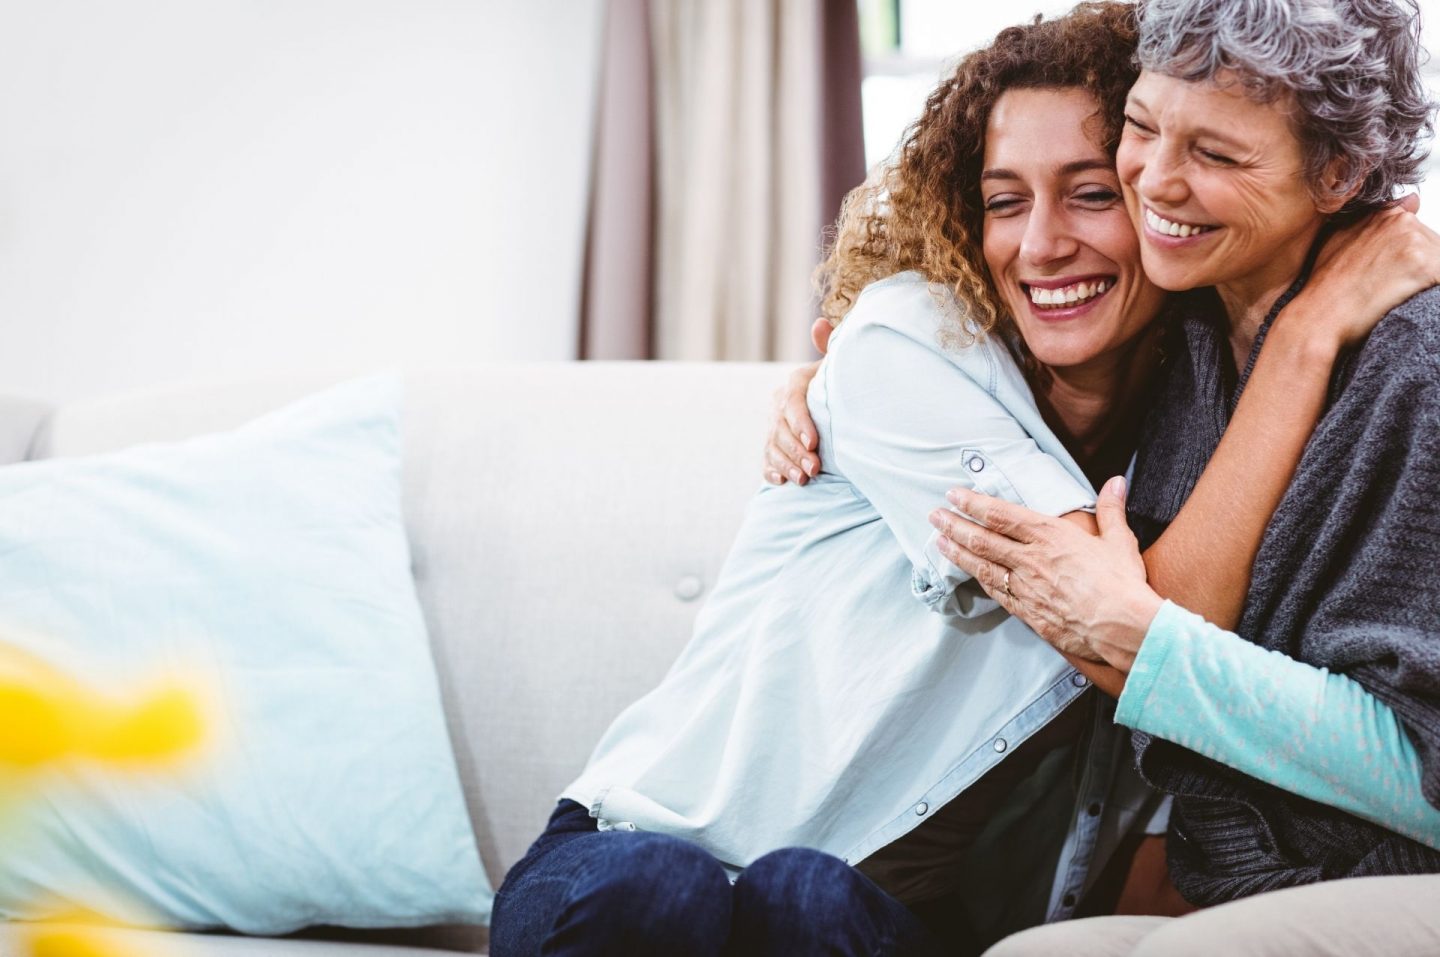 A photo of two women on a grey sofa hugging and smiling. One looks to be in her 30s or early 40s, and the other is perhaps her 70s, so they could be a mother and daughter or a woman with her carer.